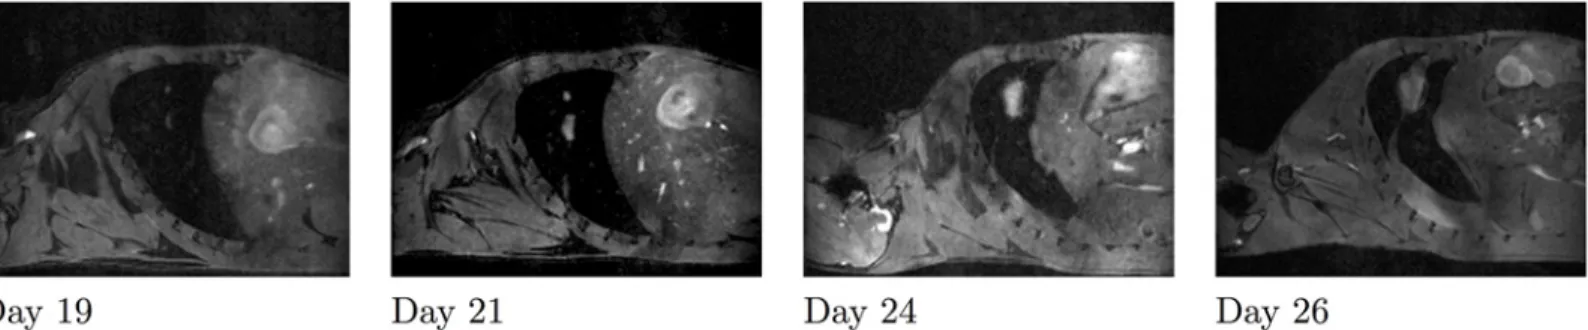 Fig 4. Metastases merging. From left to right: Sagittal slices of the lungs from day 19 until day 26 for the same mouse